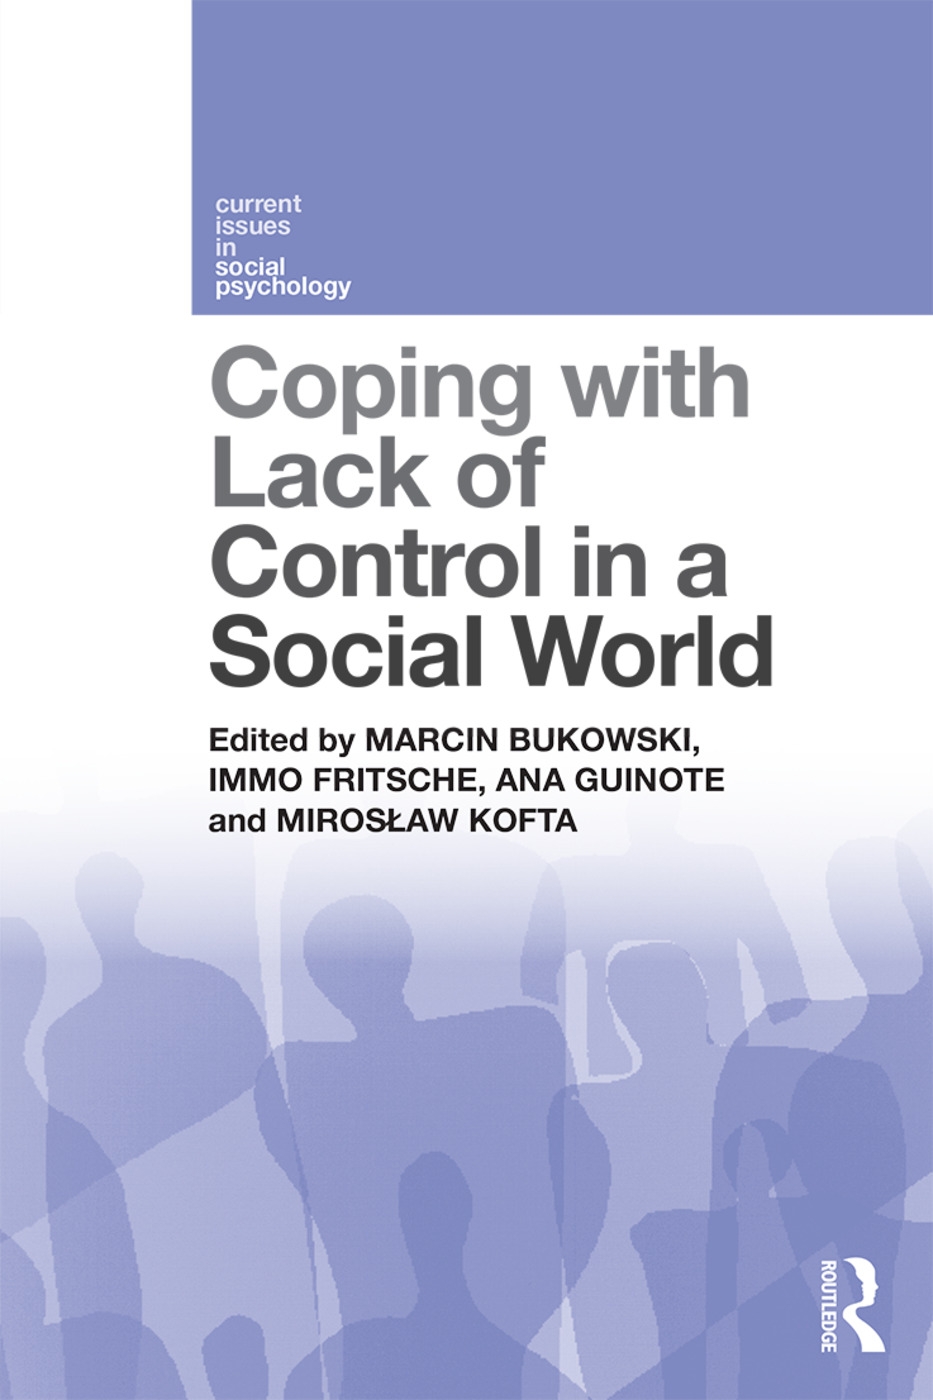 Coping with Lack of Control in a Social World